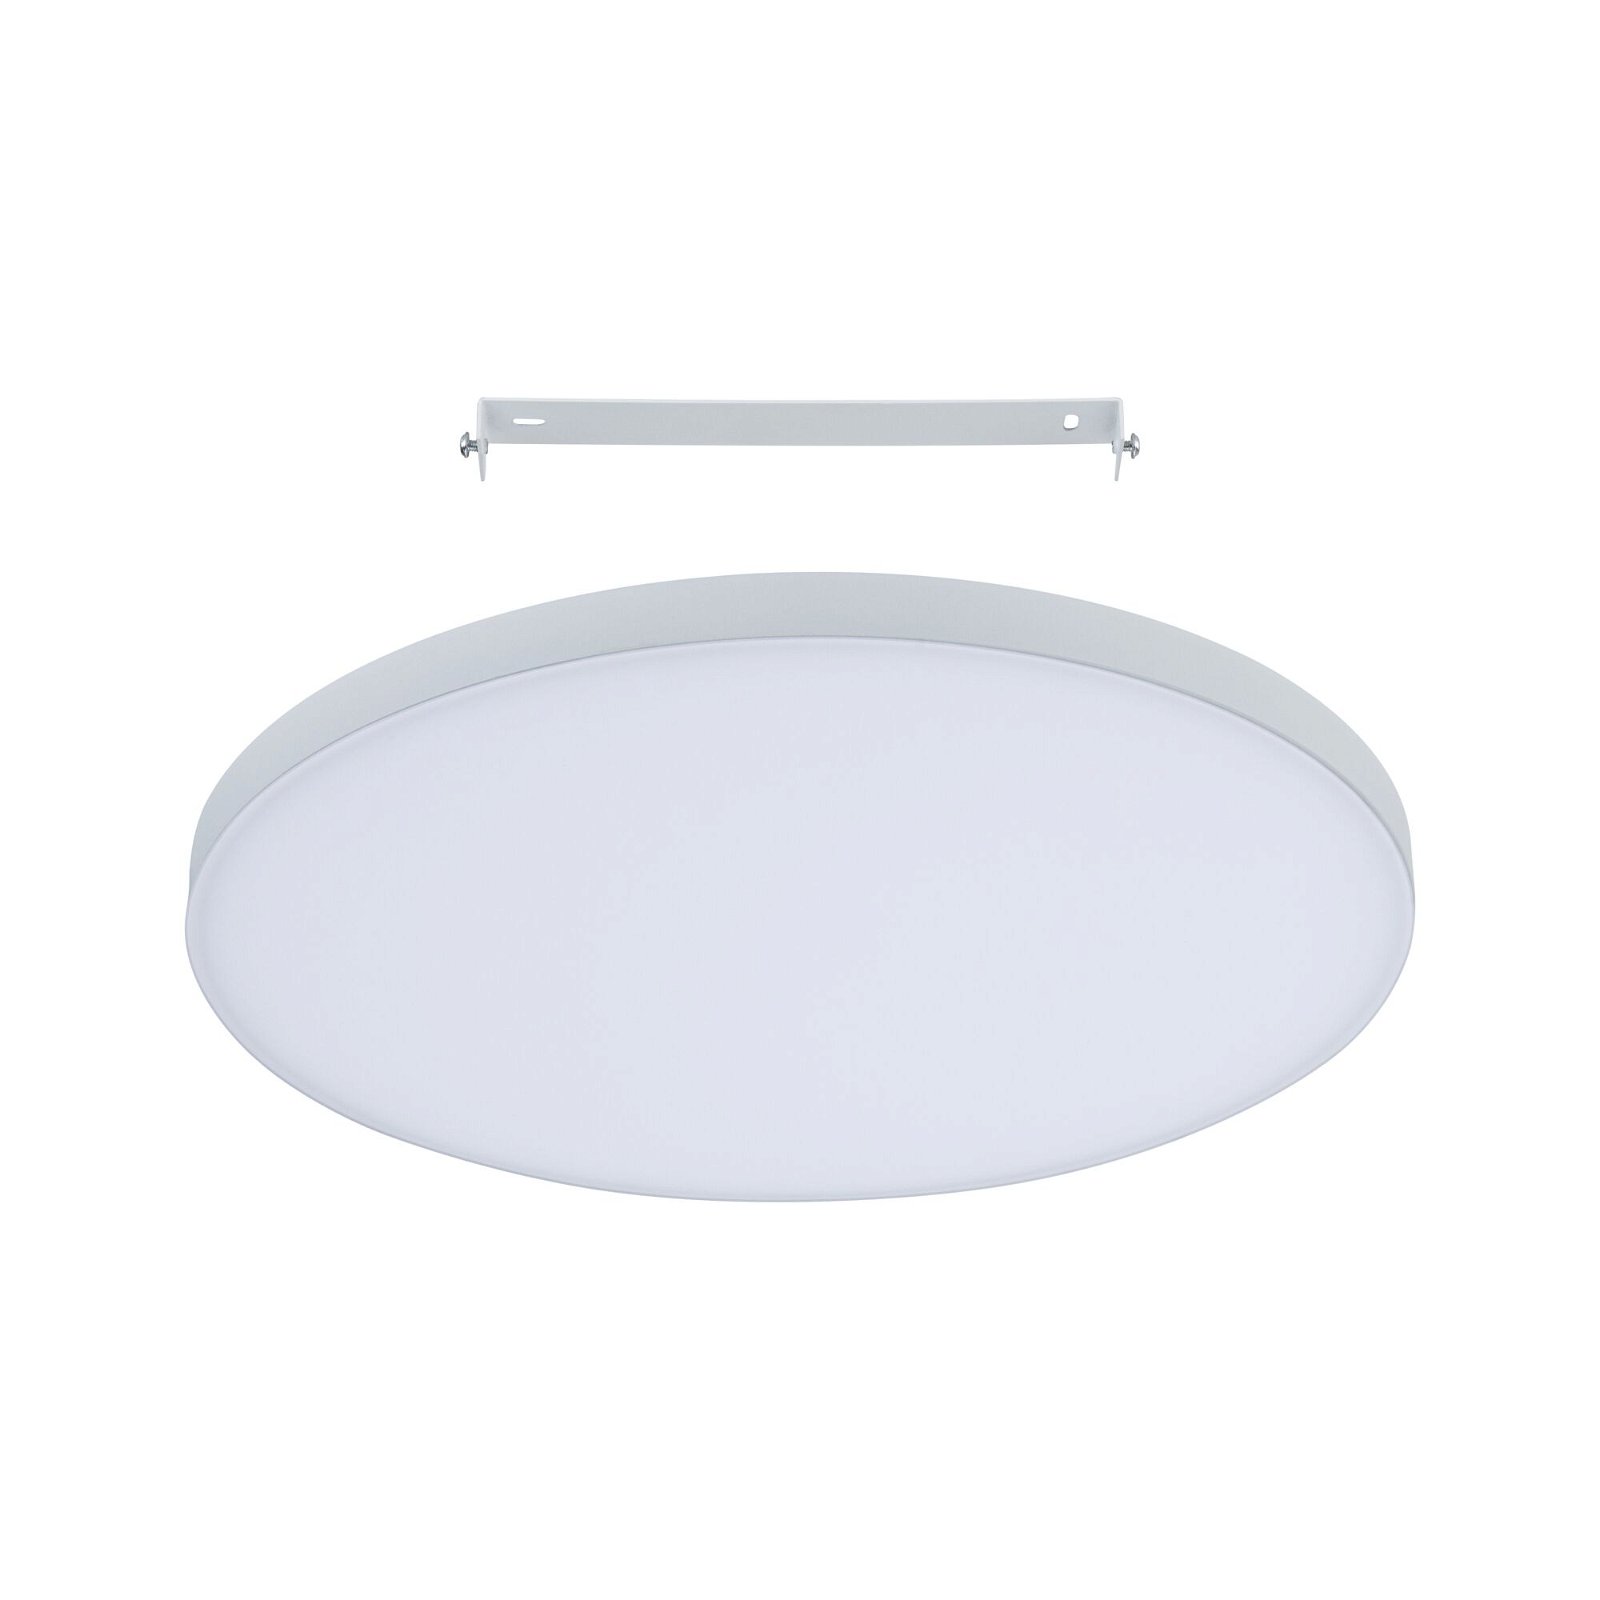 LED Panel Smart Home Zigbee Velora round 400mm 22W 2000lm RGBW White dimmable